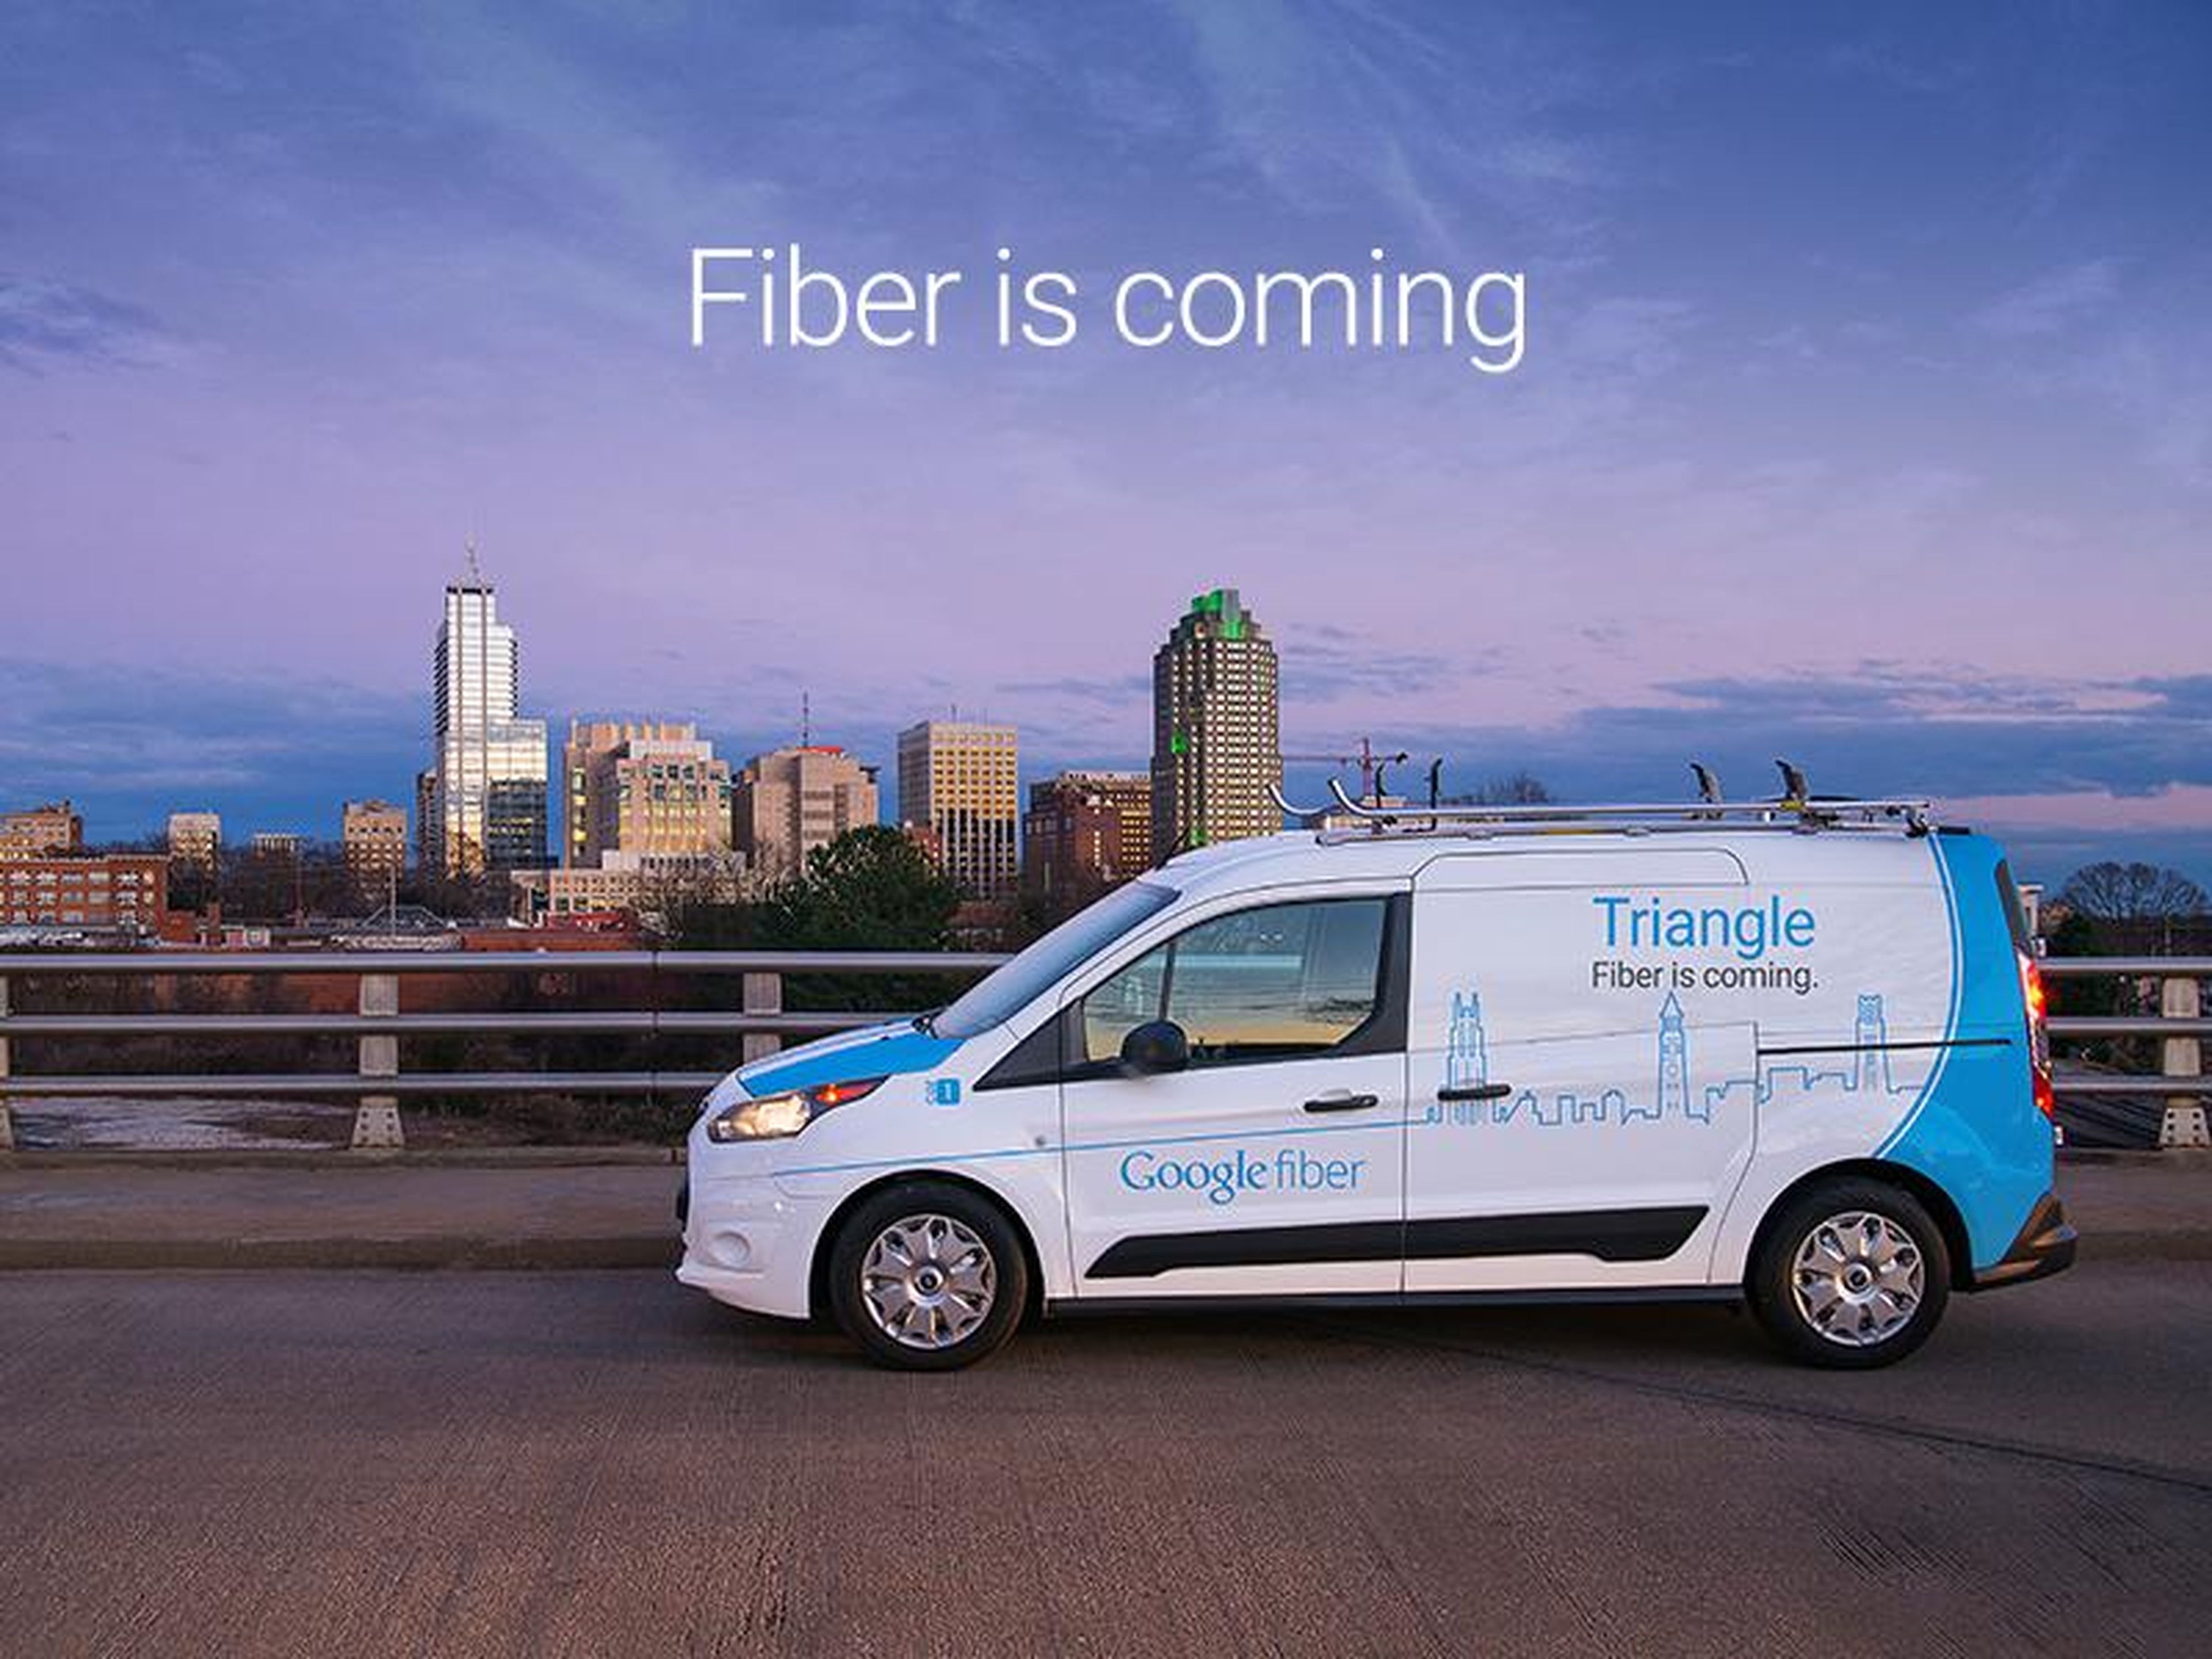 Alphabet's Access division includes Google Fiber, which launched in Kansas City in 2012 and expanded to about 9 cities. Fiber offers extremely fast high-speed internet (up to 1G) and some TV. It's billed as an alternative to